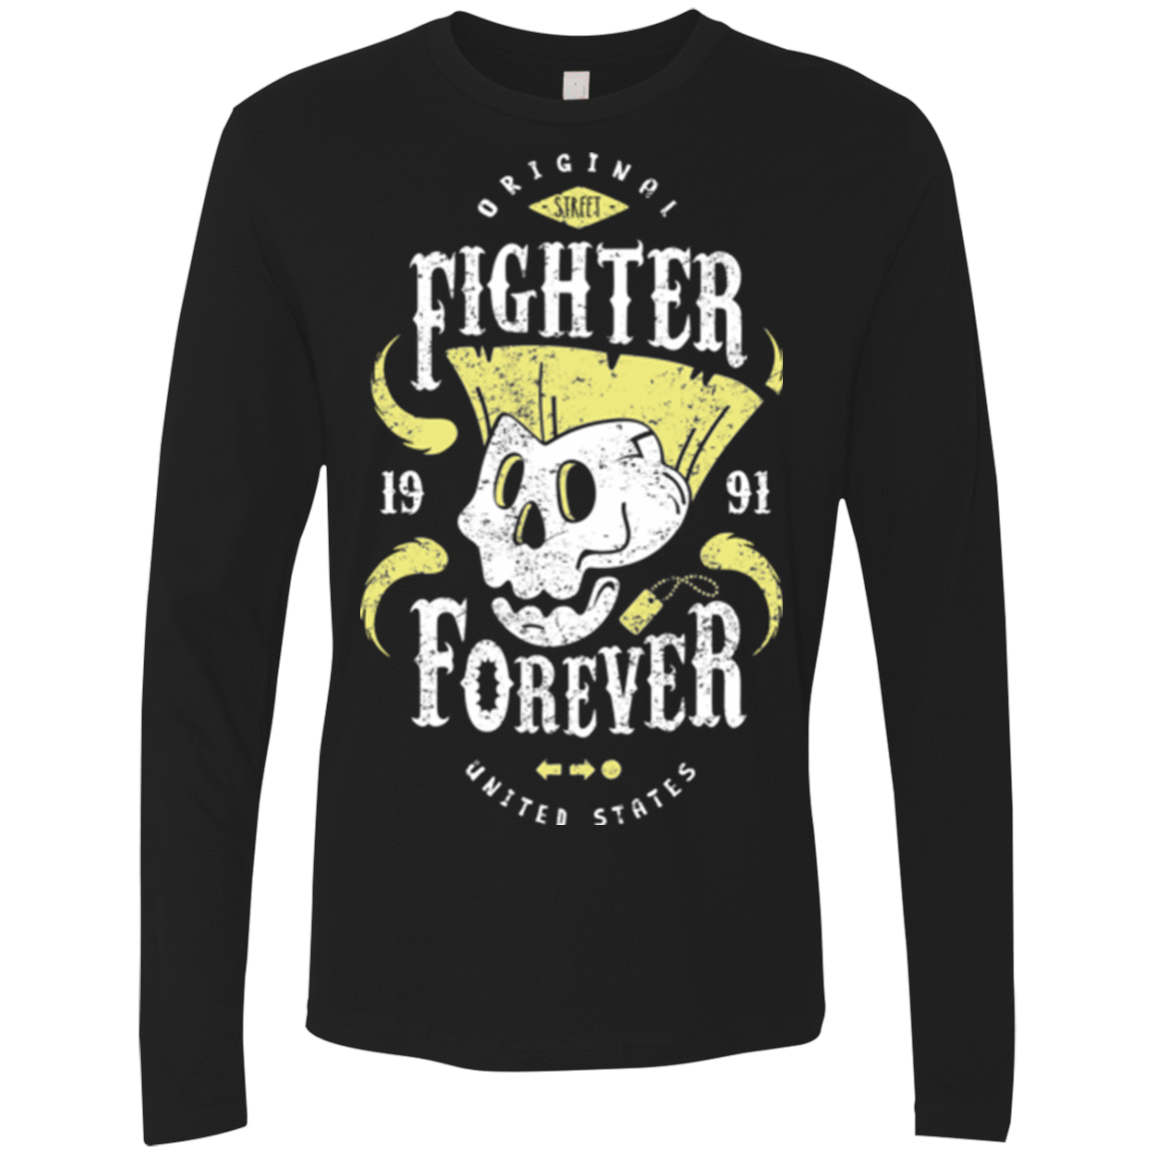 T-Shirts Black / Small Fighter Forever Guile Men's Premium Long Sleeve